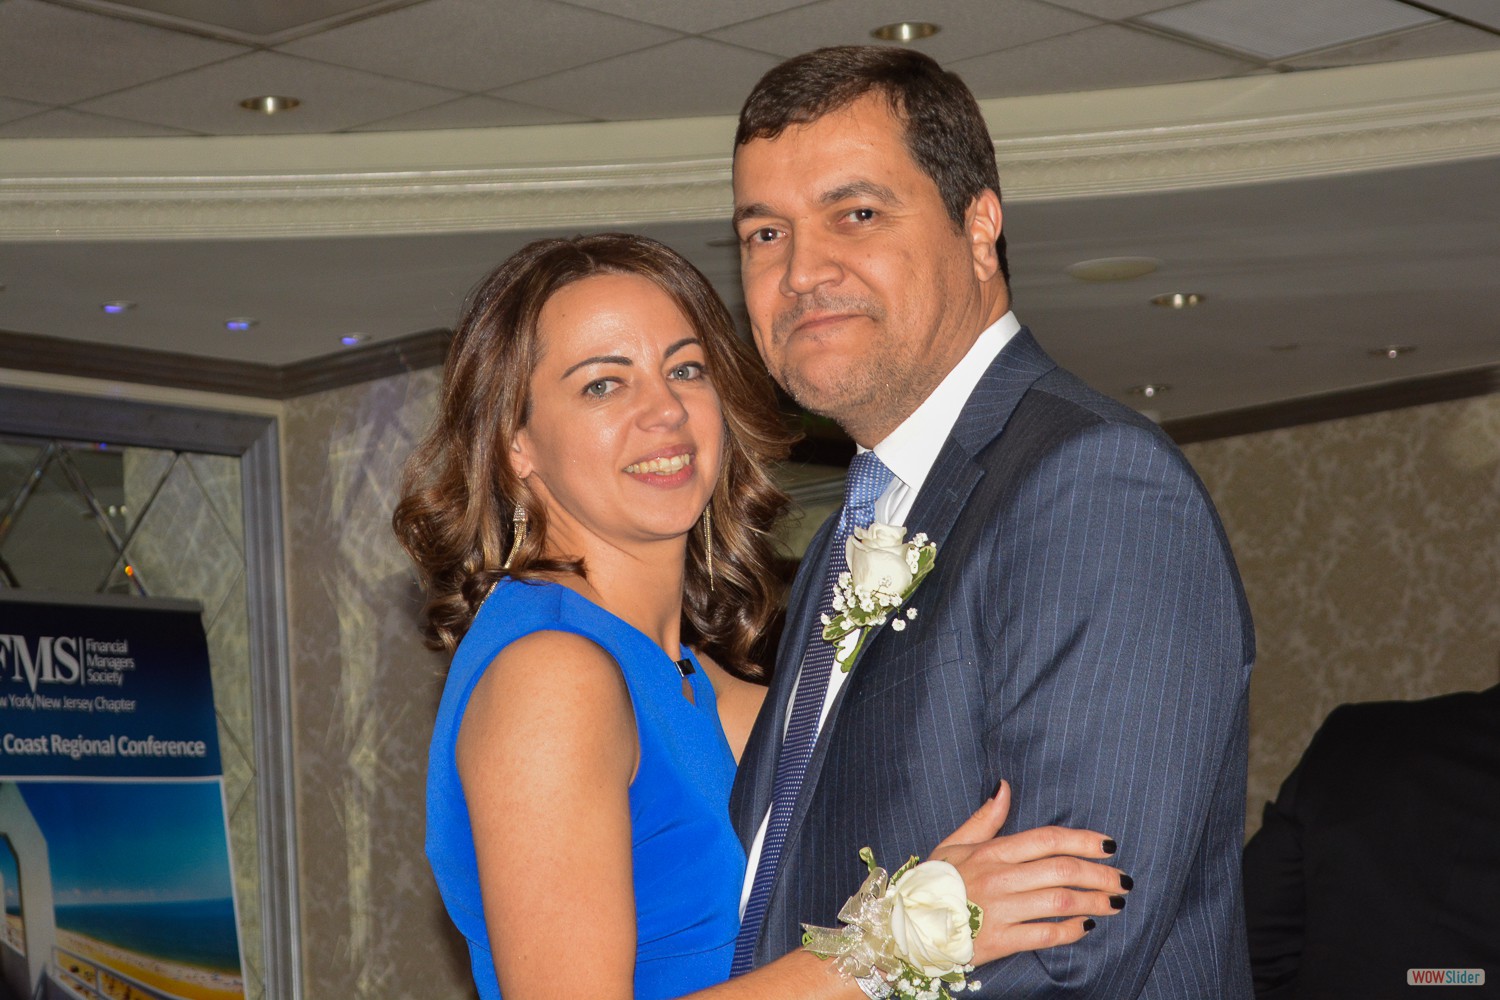 Newly installed Chapter President Adriano Duarte shares the first dance with spouse Monica